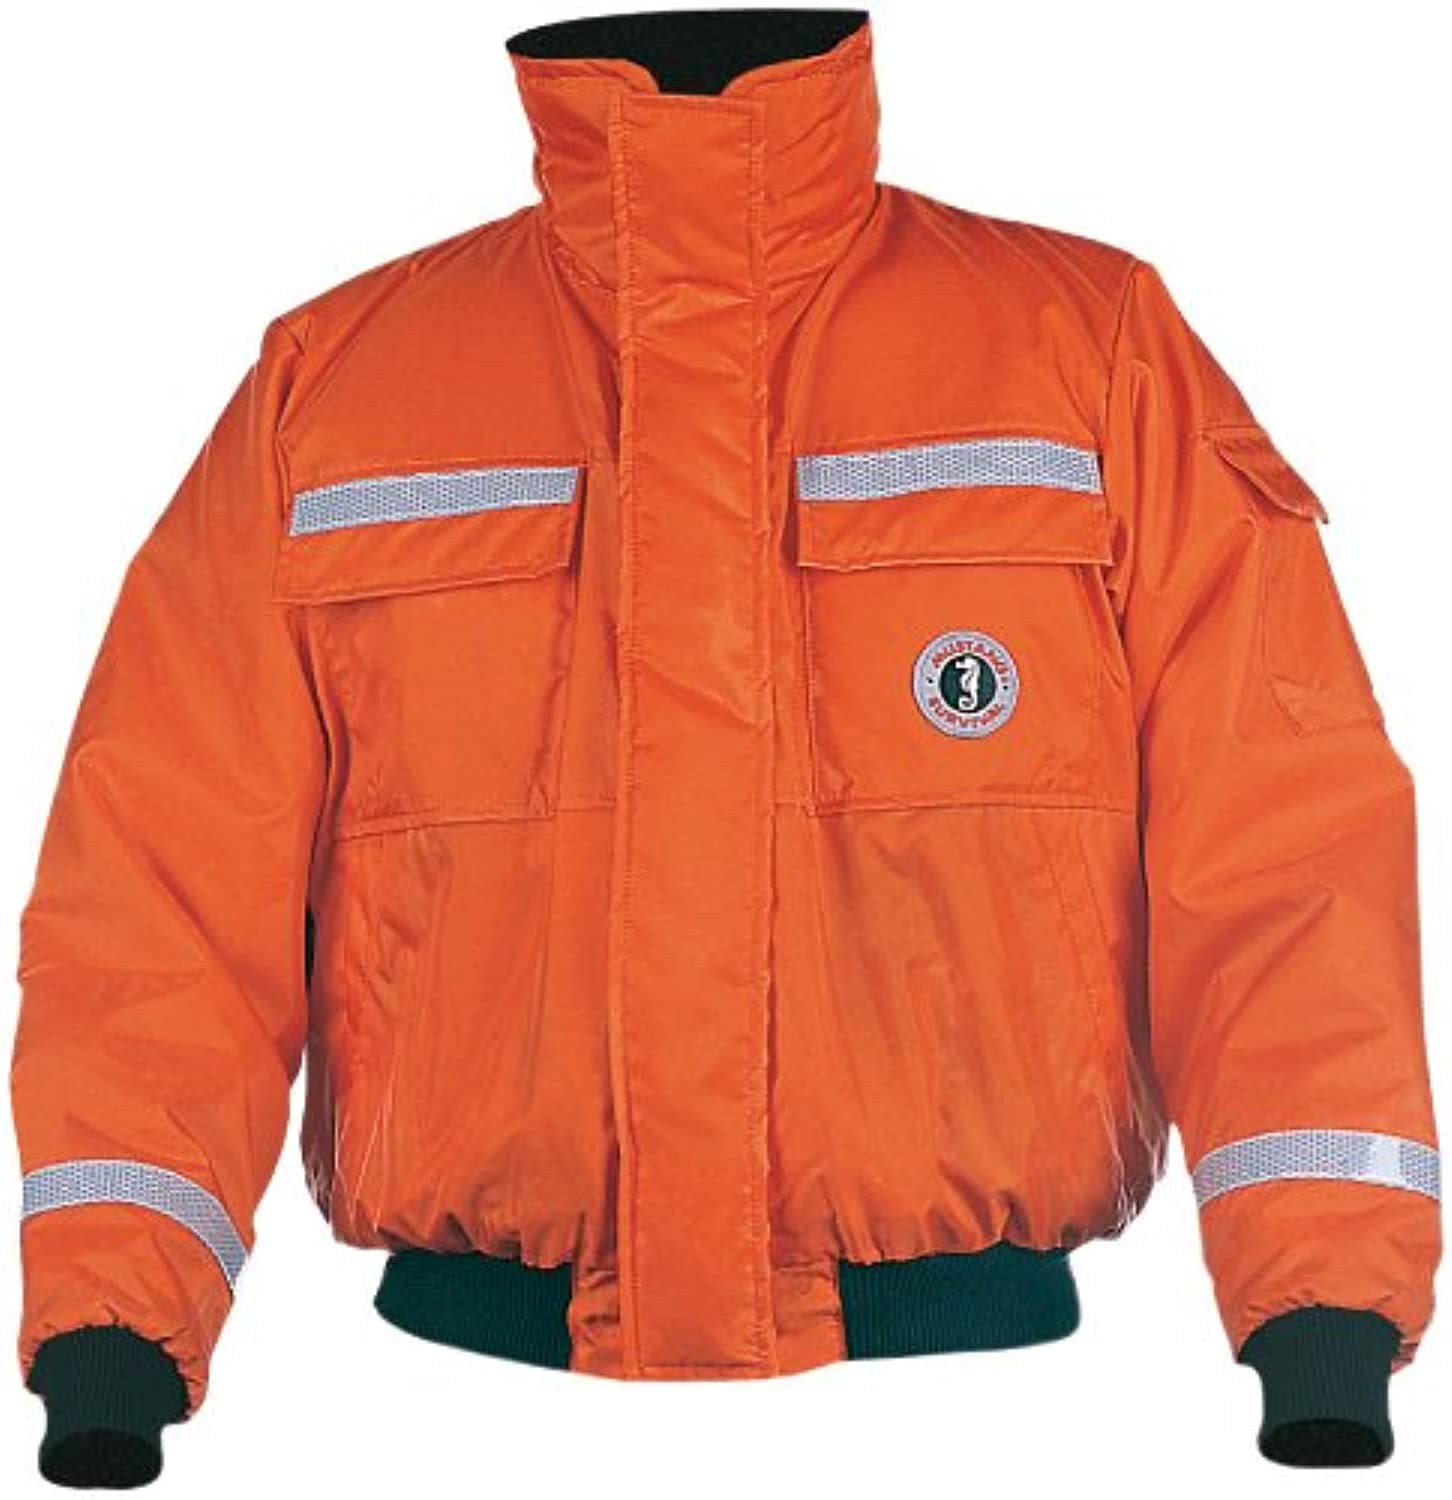 Mustang Survival Classic Bomber Jacket (Orange, Small)